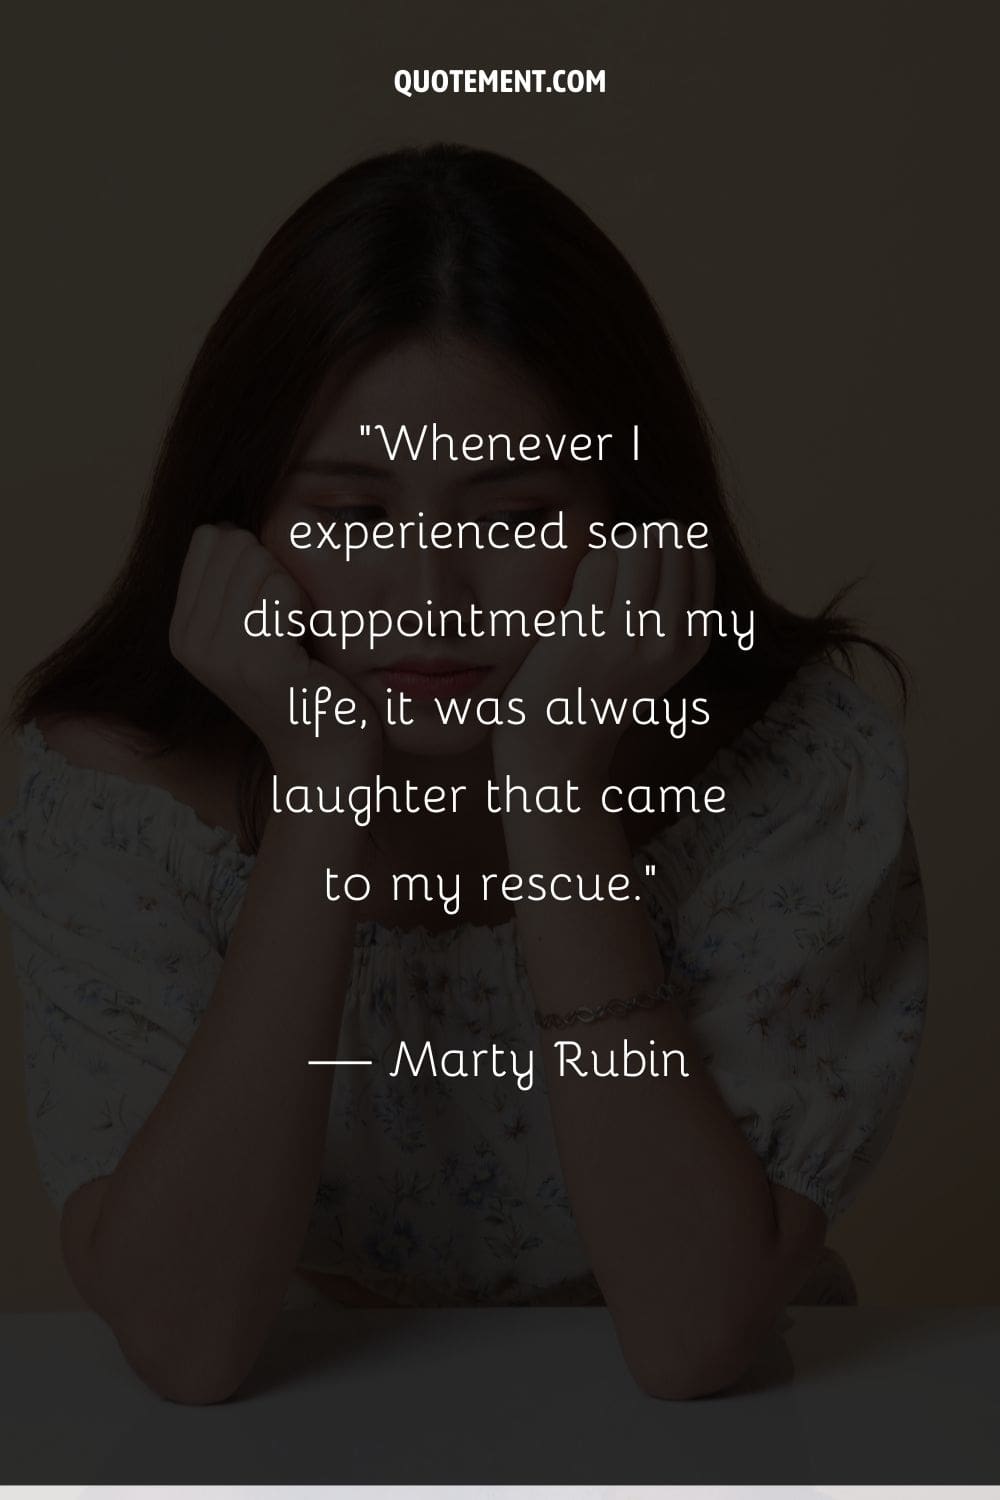 Whenever I experienced some disappointment in my life, it was always laughter that came to my rescue